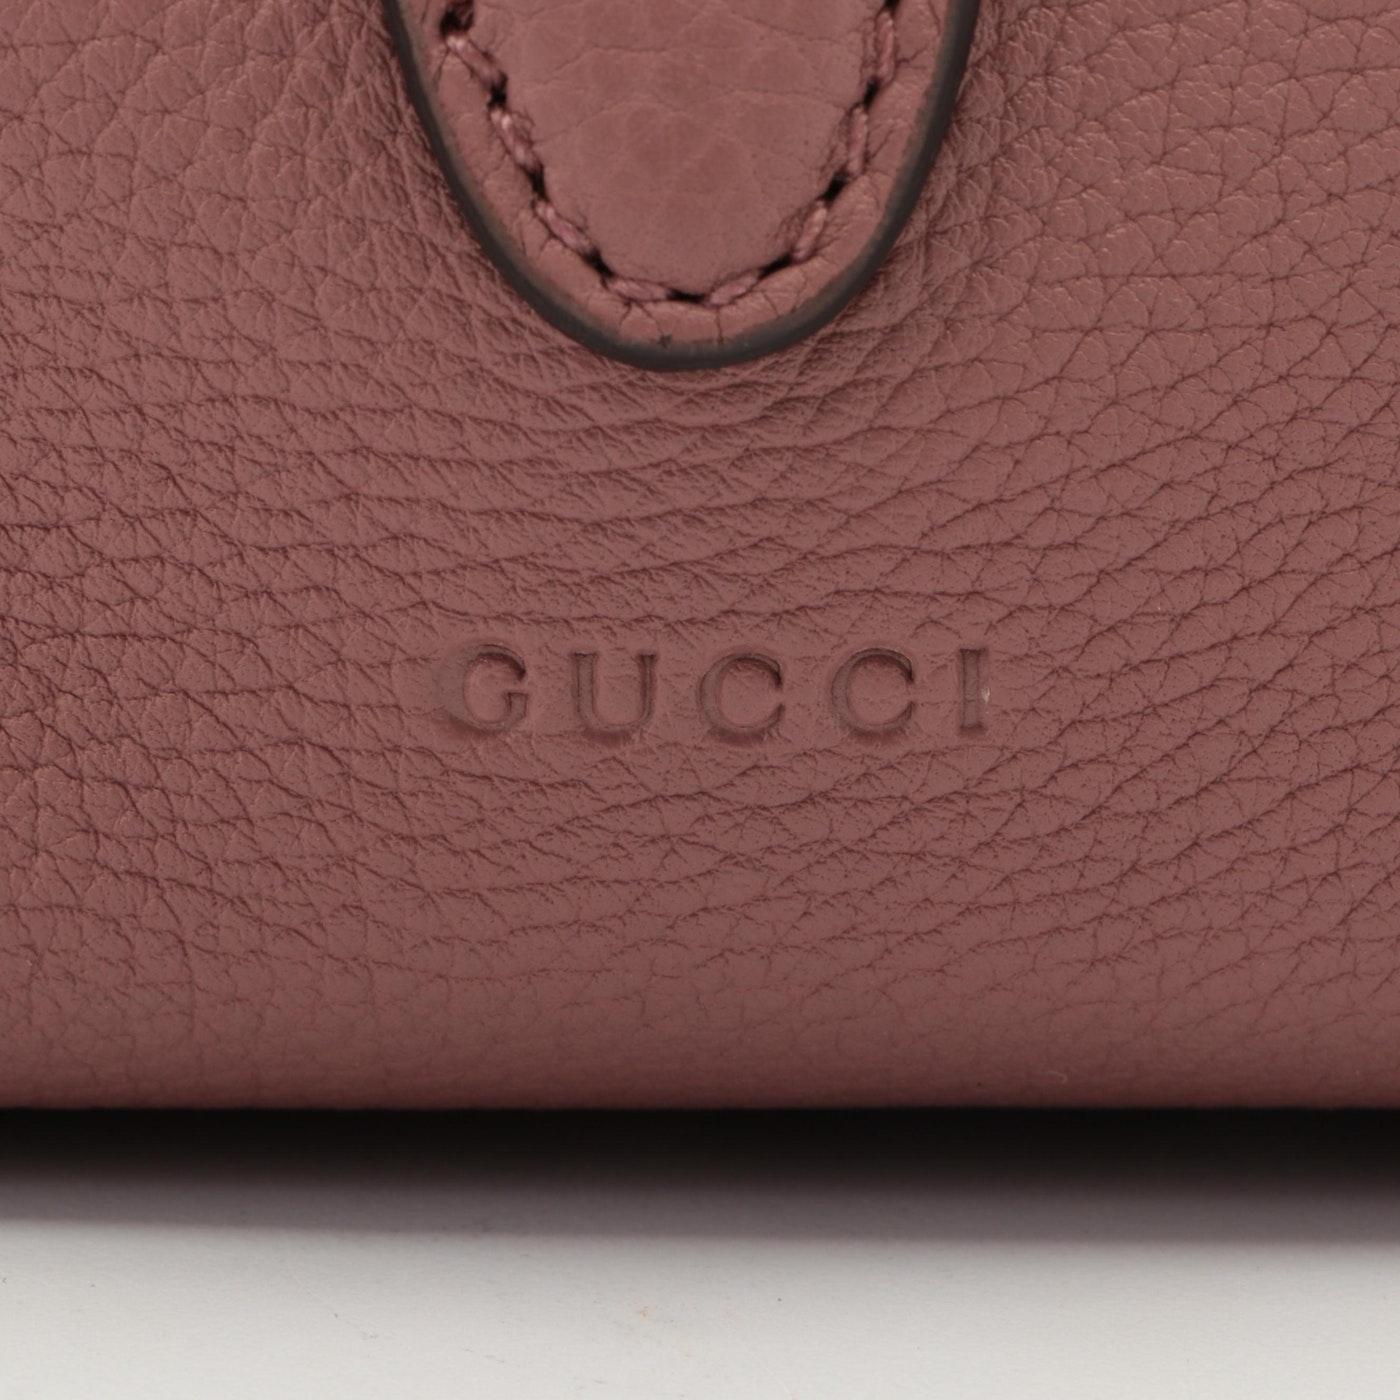 Women's New Gucci Medium Soft Jackie Tote Bag in Full-Grained Leather w/ Piston Closure For Sale